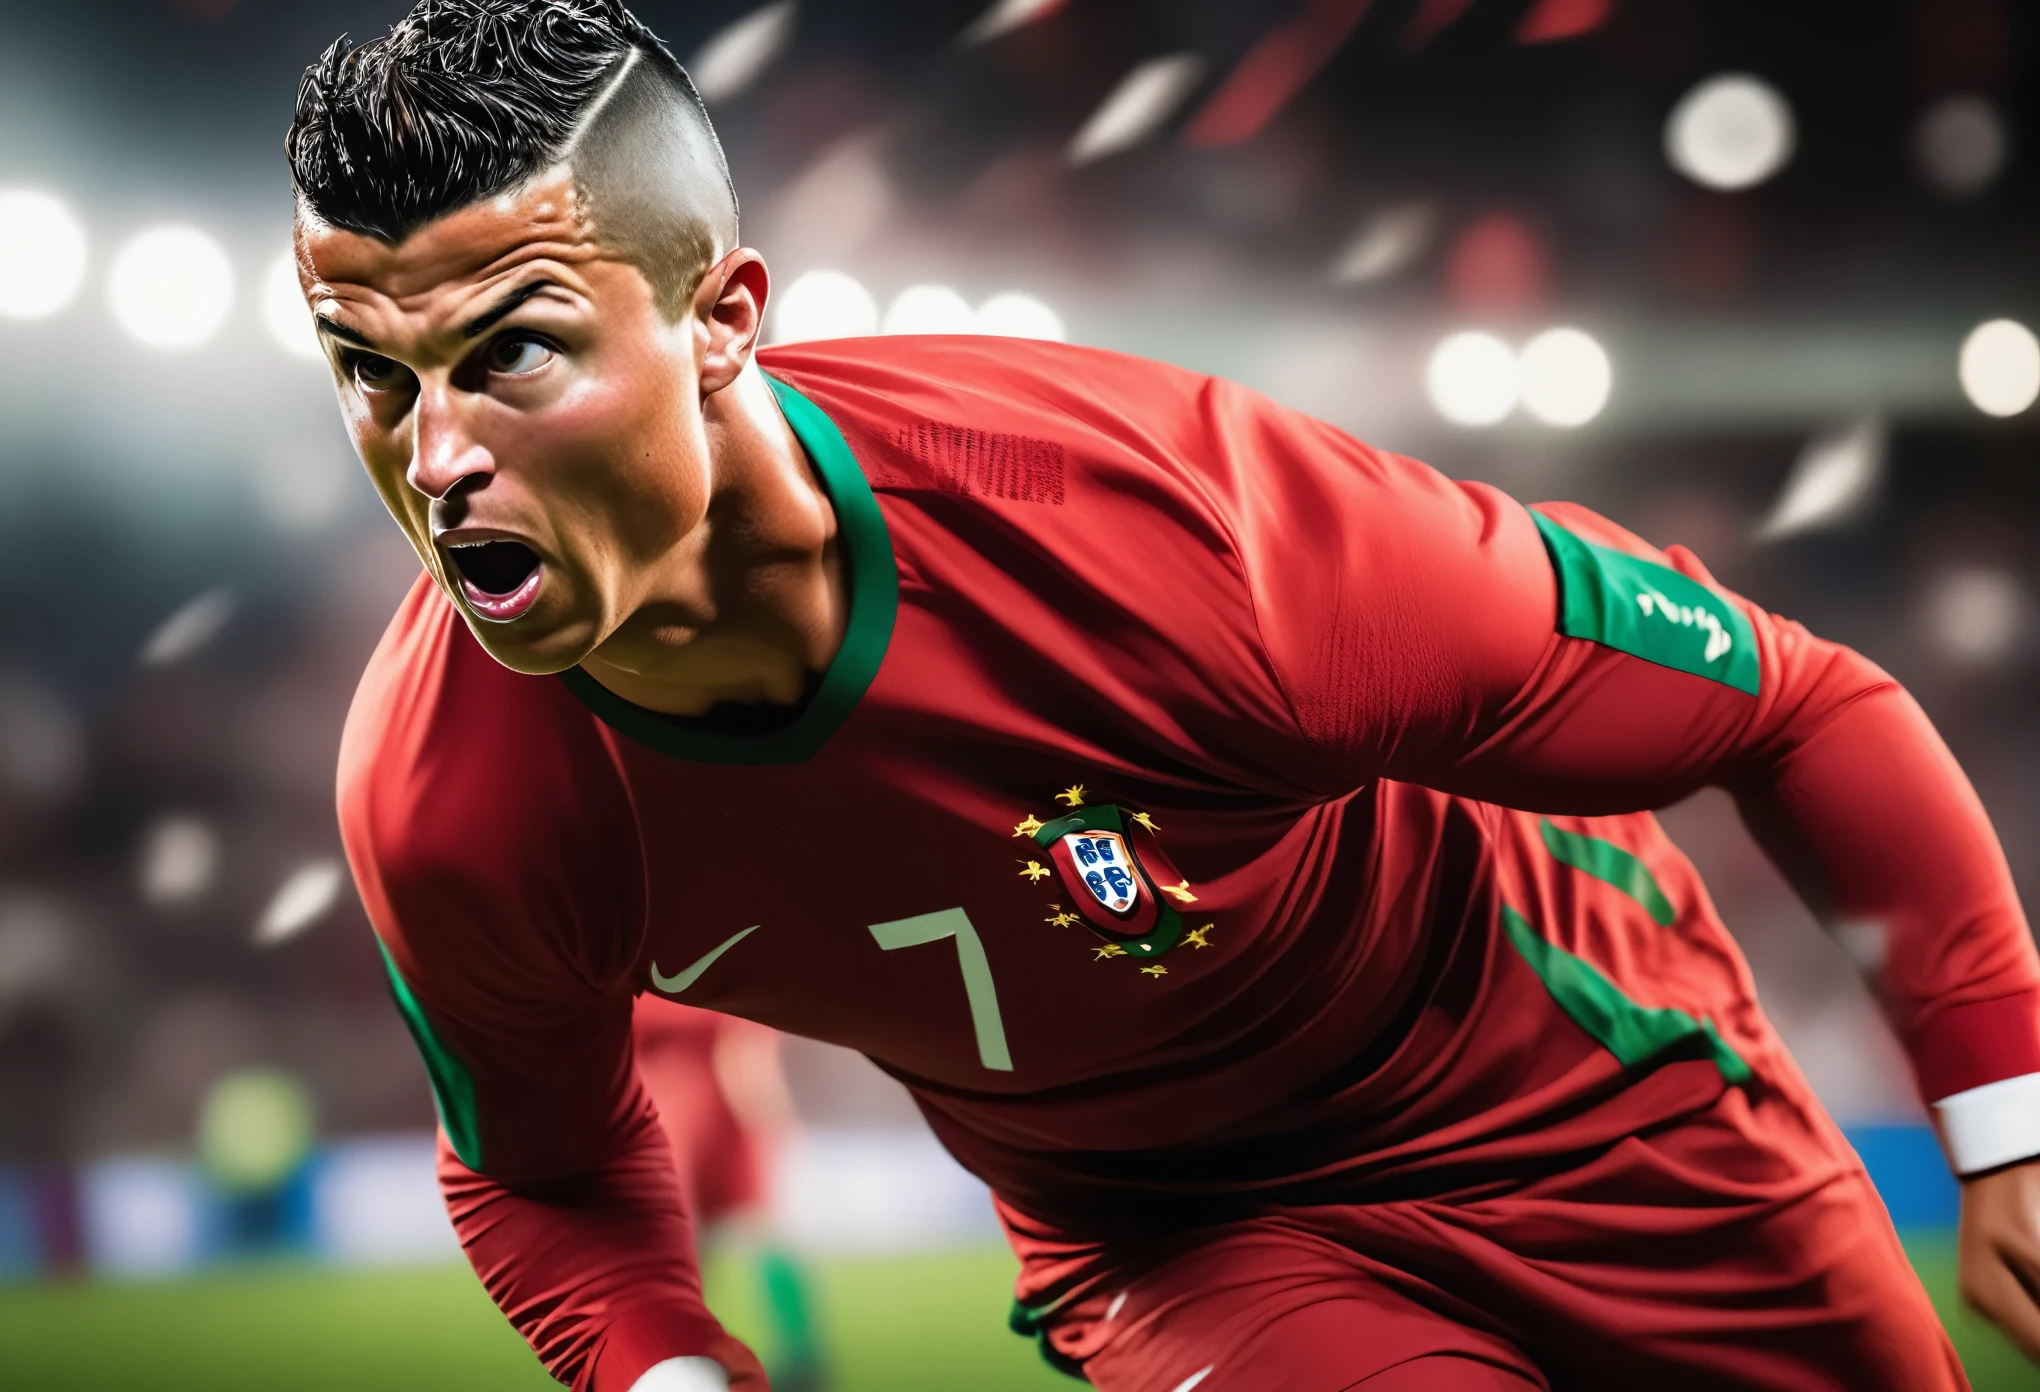 Cinematic portrait photo of Ronaldo scoring for Portugal, European football, depth of field, bokeh, sport photography, action-packed moment, dynamic, intense competition, thrilling movement, showcasing skill, conveying energy, adrenaline-fueled visuals, immersive experience, storytelling through action, dramatic composition, showcasing passion, capturing decisive moments, vibrant colours, dynamic composition, powerful imagery, engaging perspective, realistic